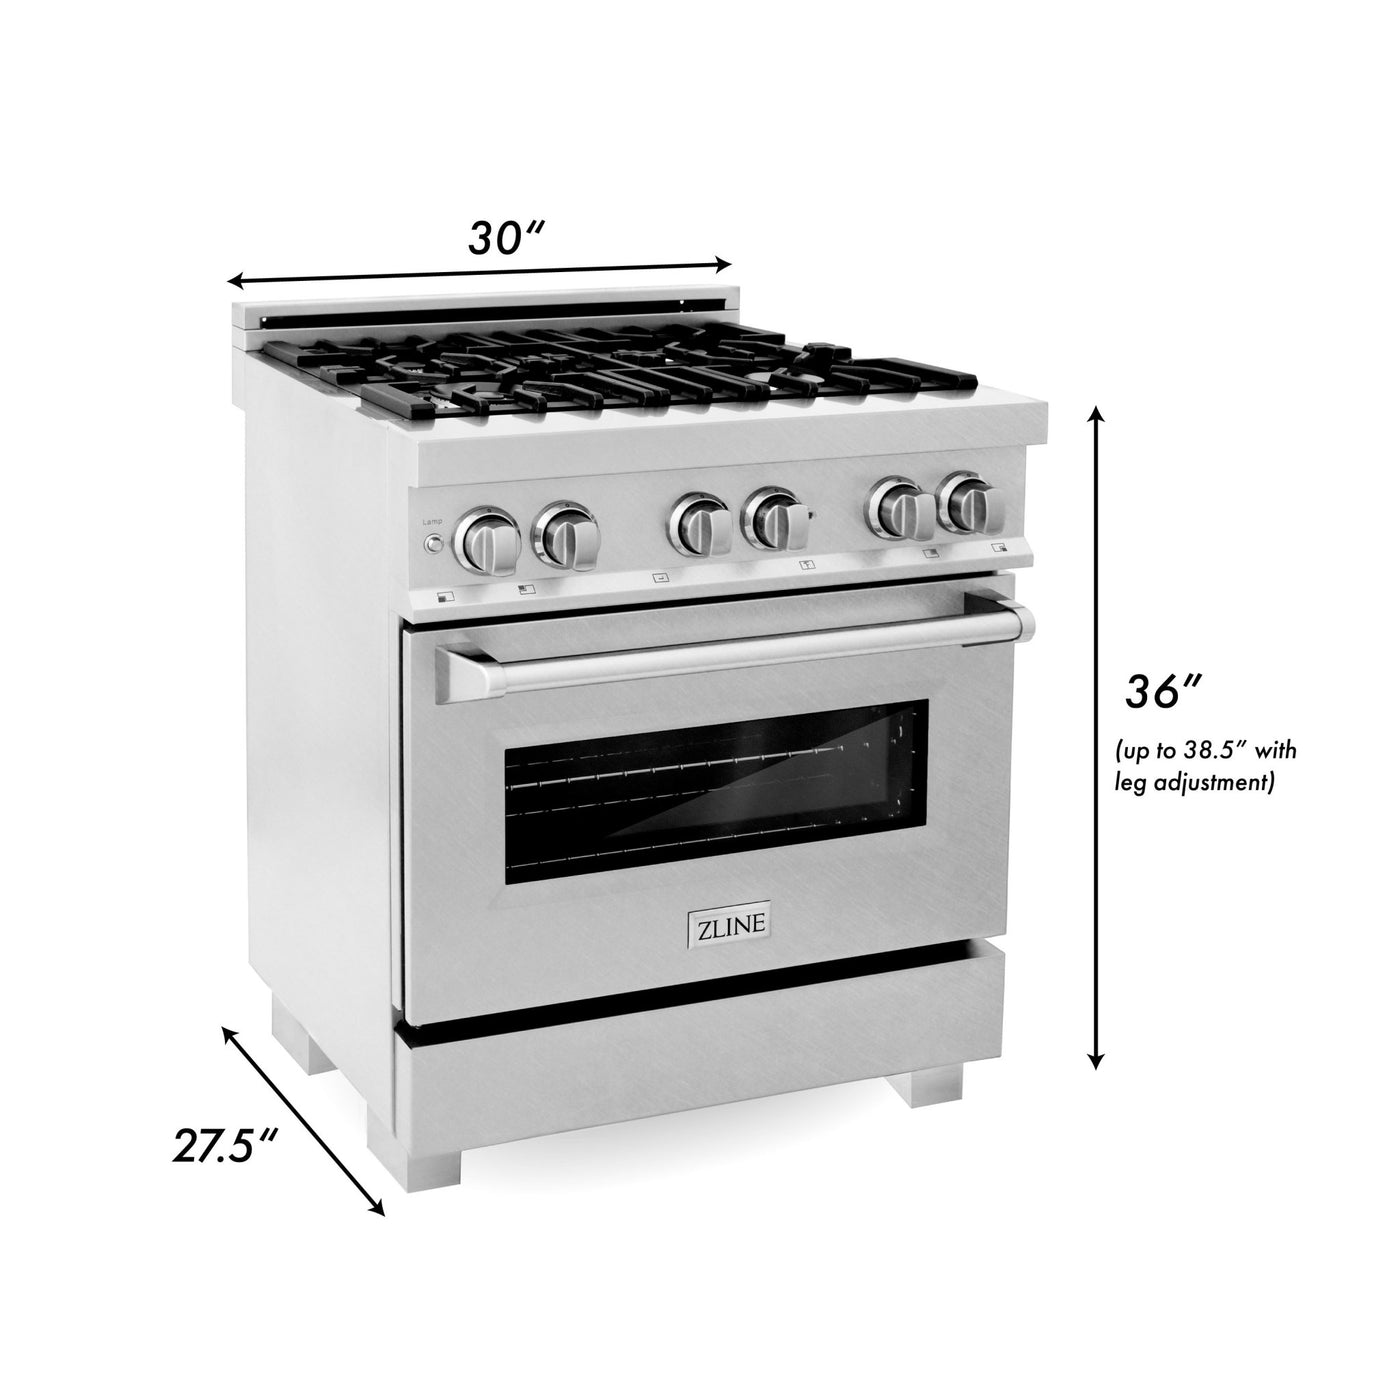 ZLINE Kitchen and Bath, ZLINE 30" Professional Dual Fuel Range in DuraSnow® Stainless Steel with Color Door Finishes, RAS-SN-30, ZLINE 30 in. Professional Dual Fuel Stainless | Rustic Kitchen and Bath